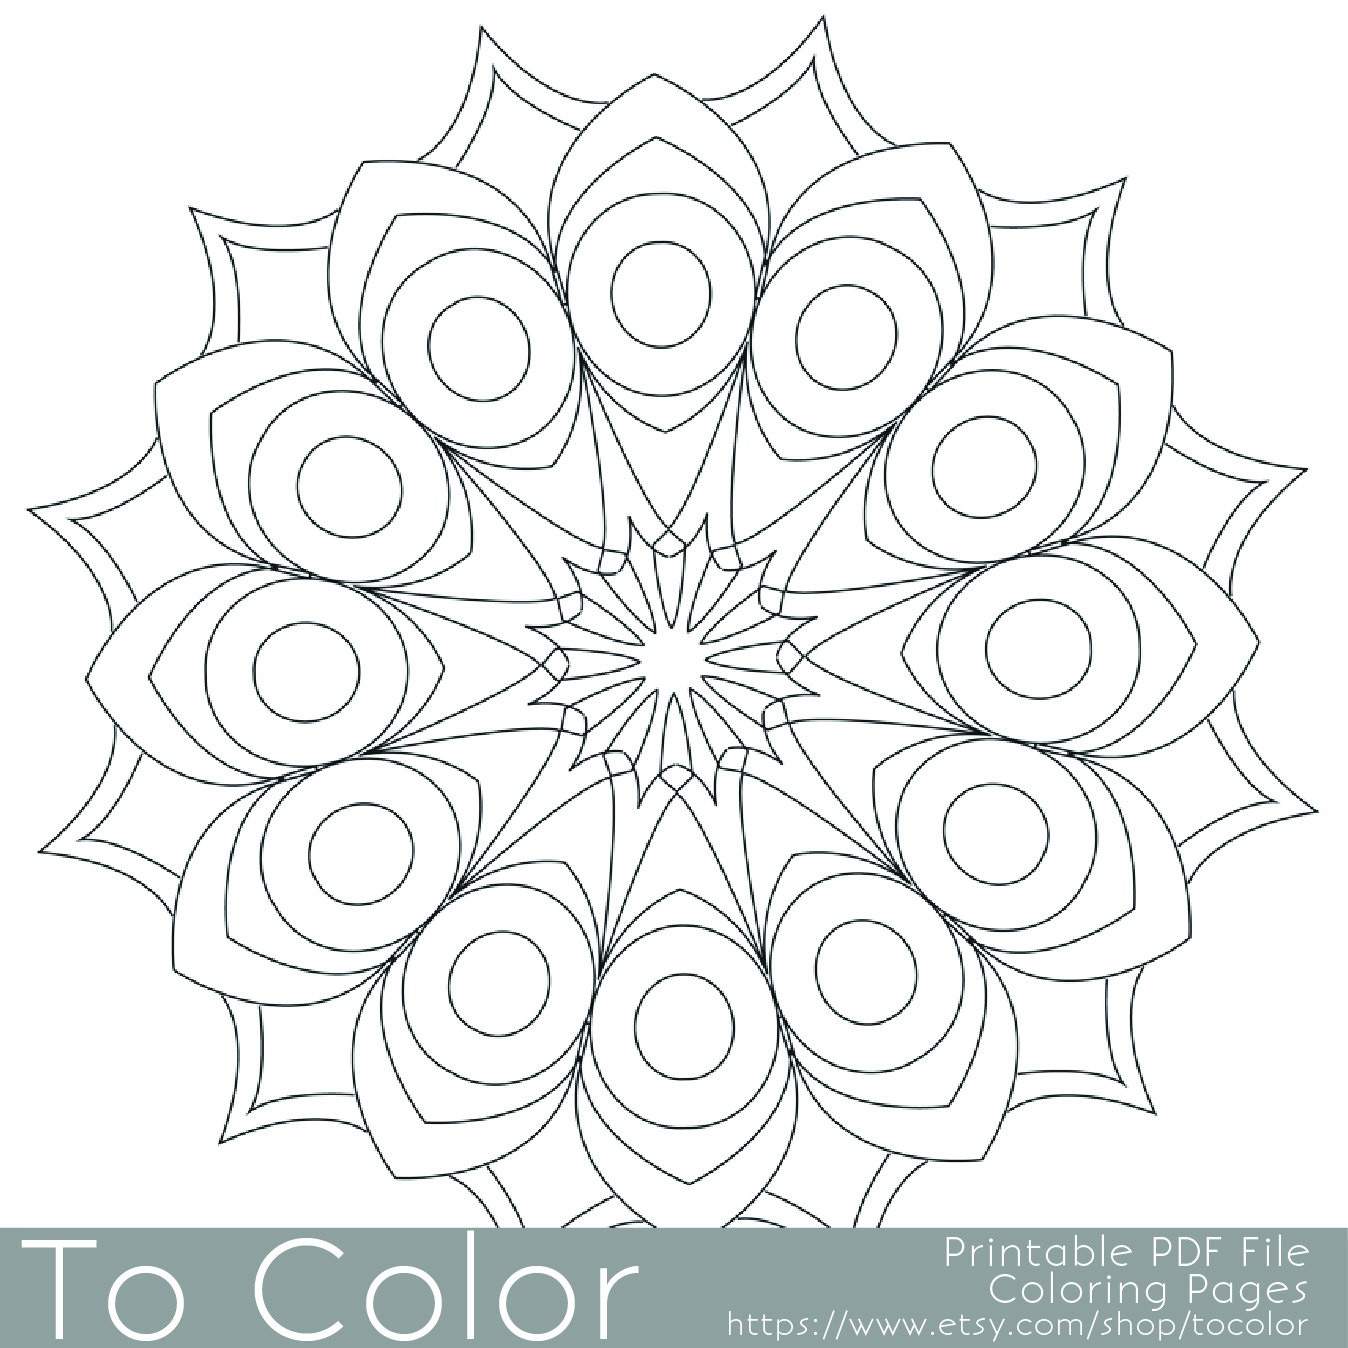 Easy Printable Coloring Pages
 Printable Circular Mandala Easy Coloring Pages for Adults Big